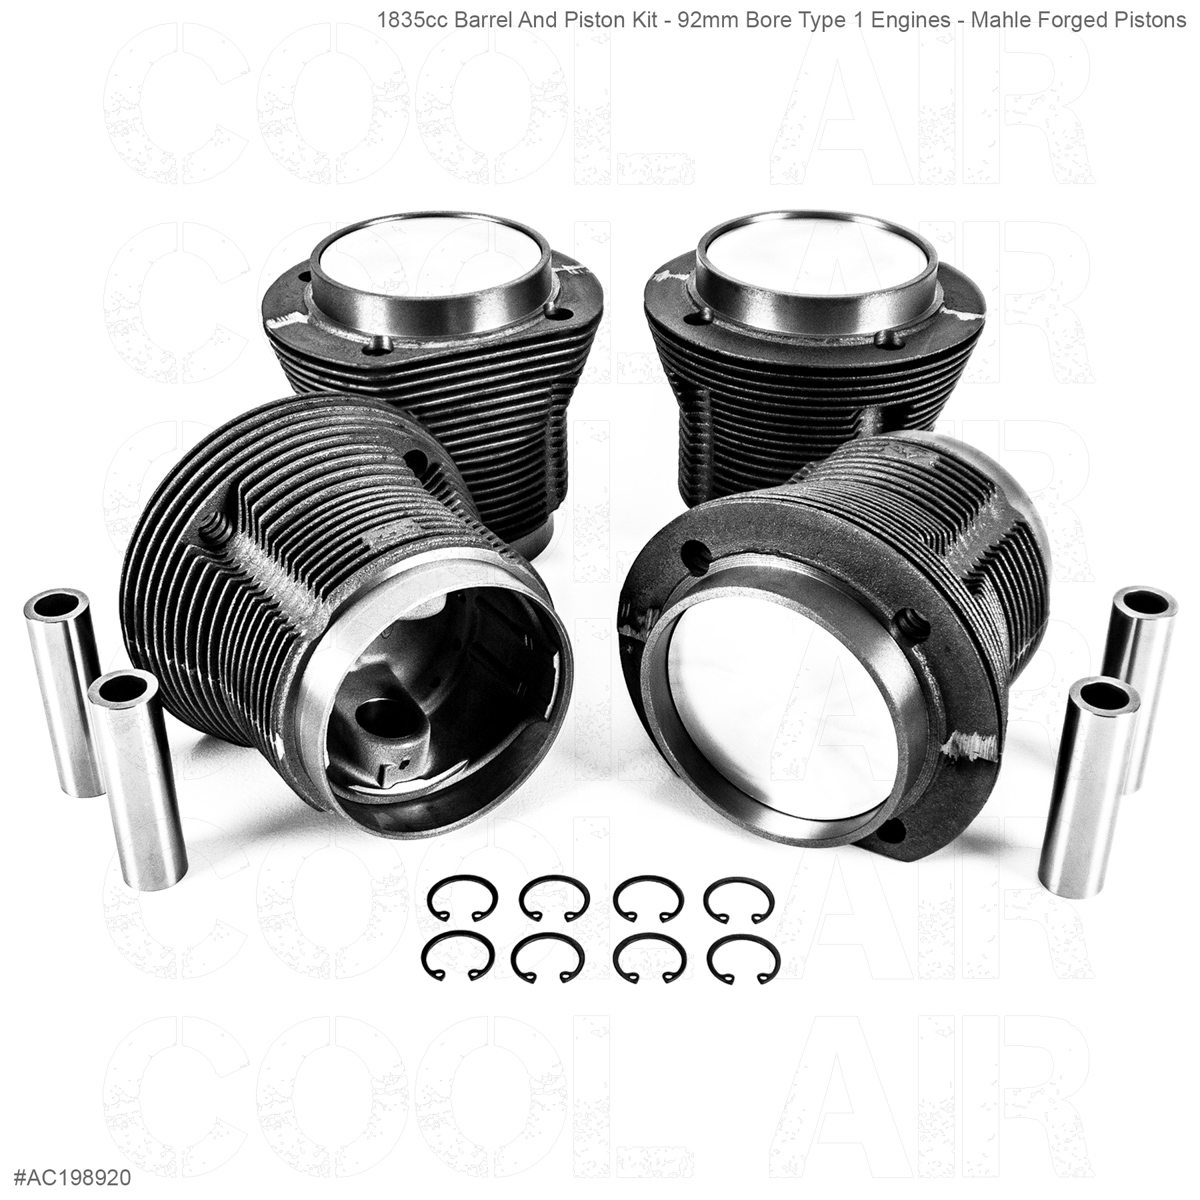 1835cc Barrel And Piston Kit - 92mm Bore Type 1 Engines - Mahle Forged Pistons